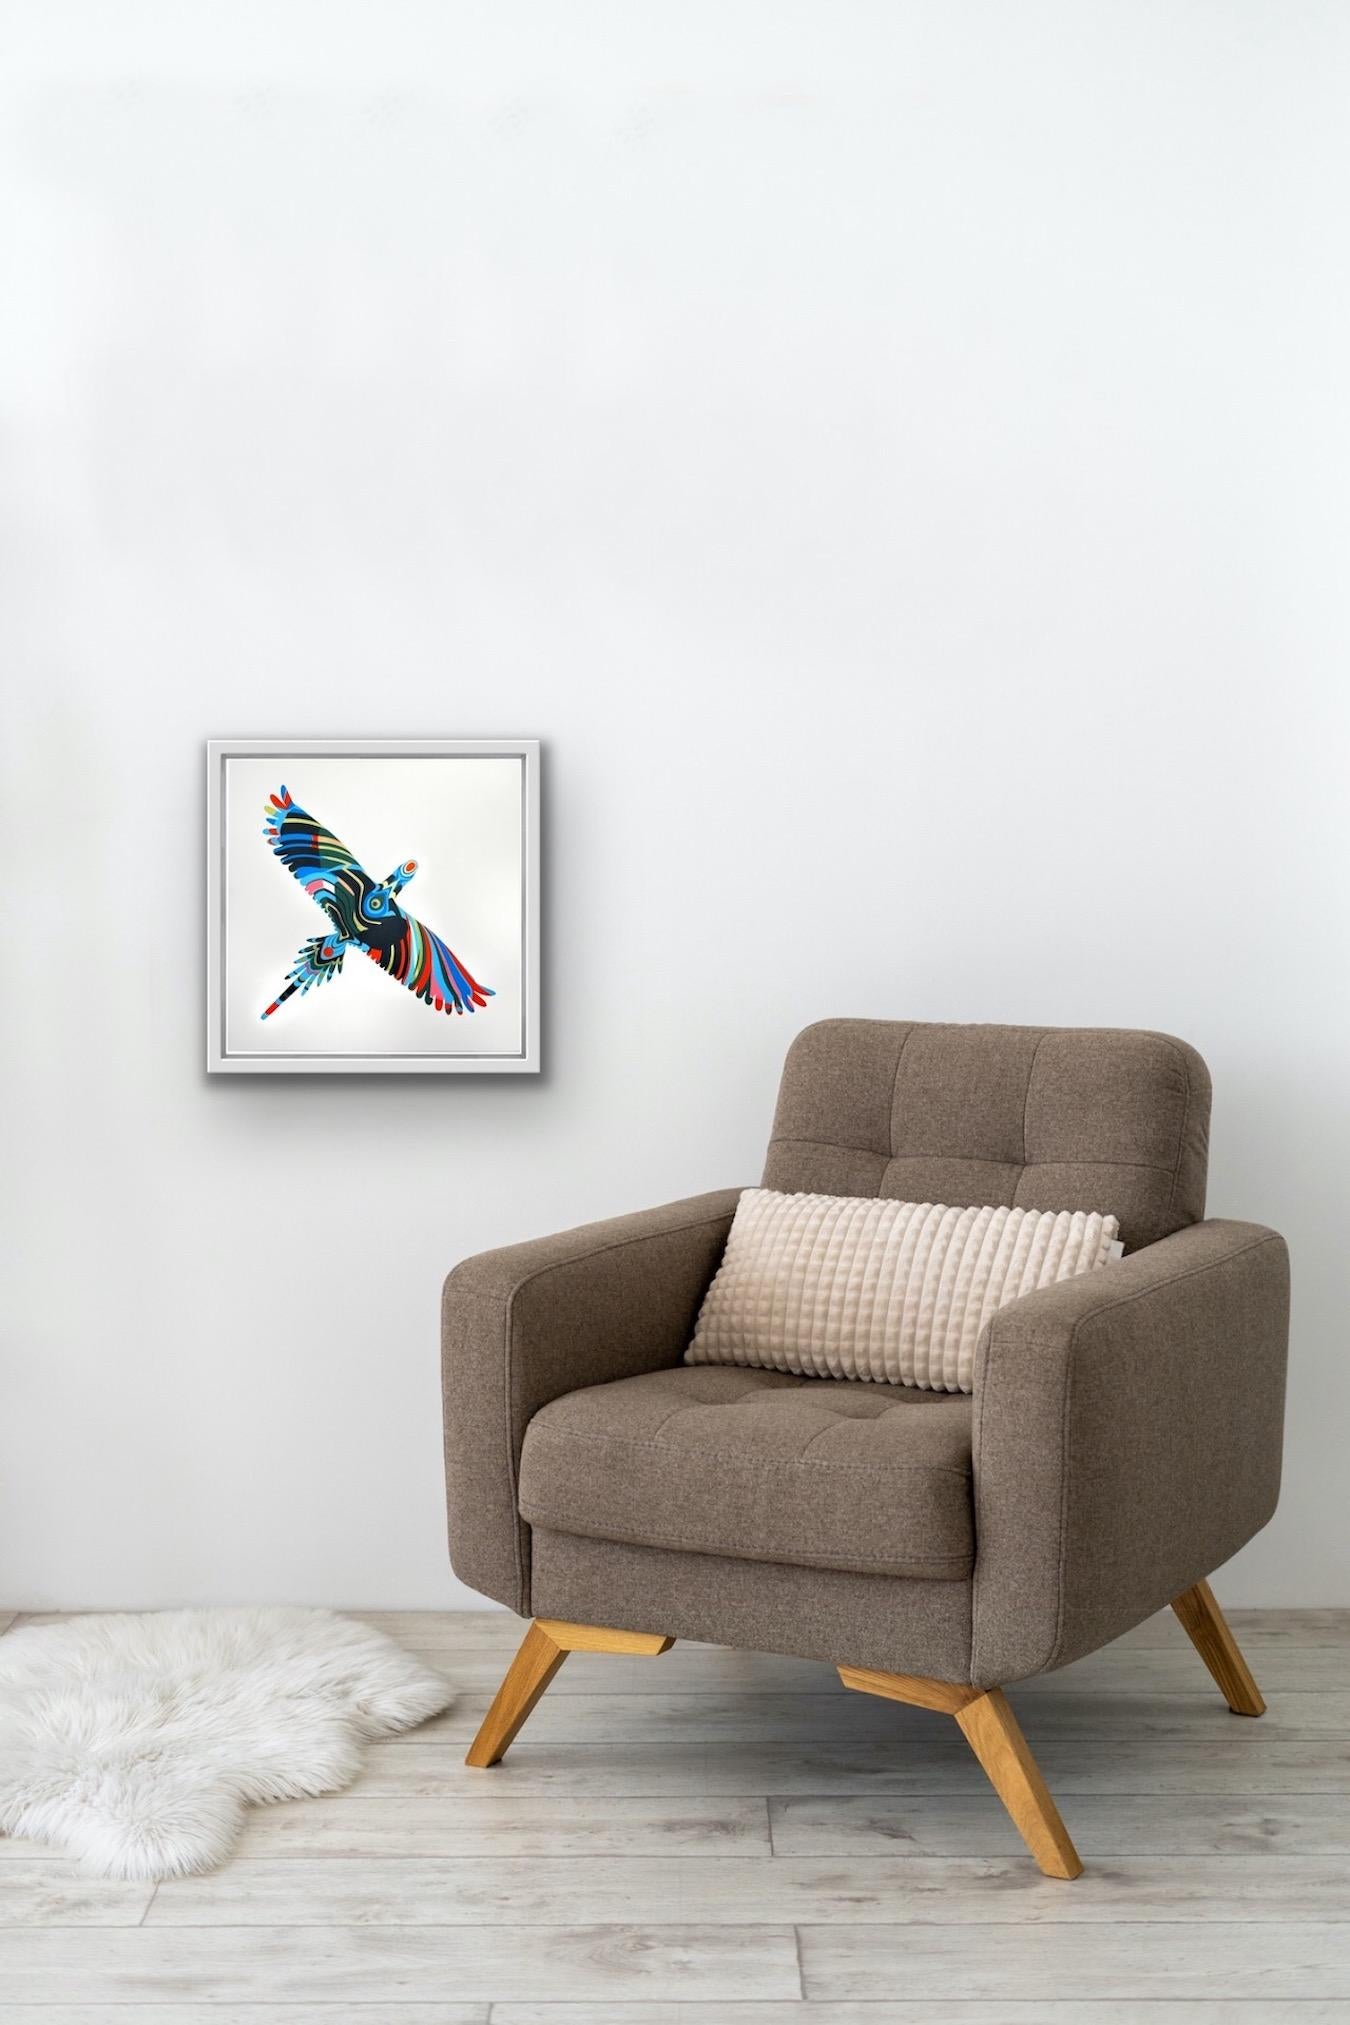 The Gift of Flight, Chris Keegan, Limited edition screen print, Pop art for sale For Sale 2